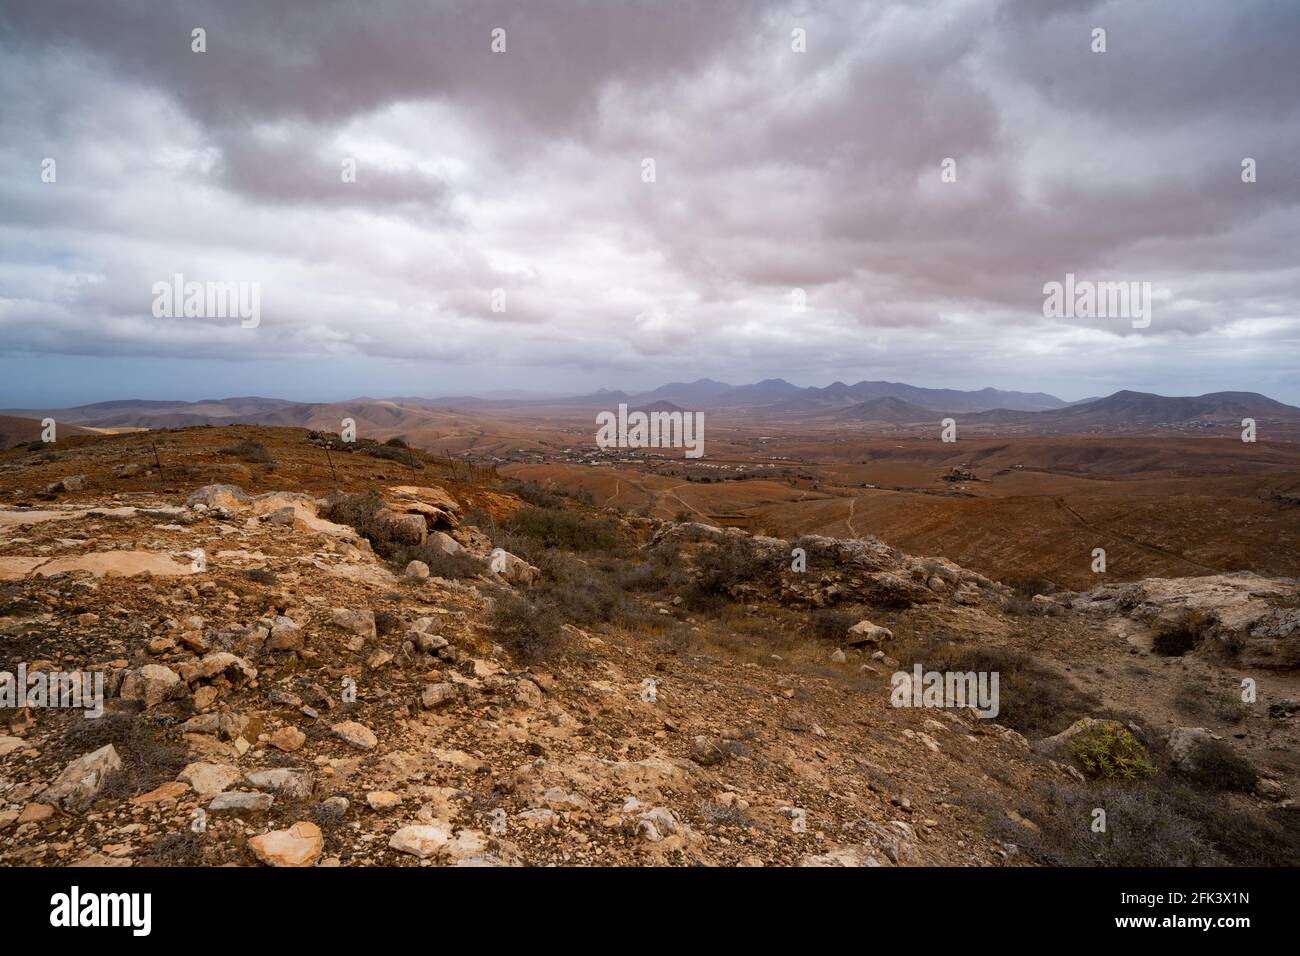 Lonely desert landscape under low hanging clouds Stock Photo